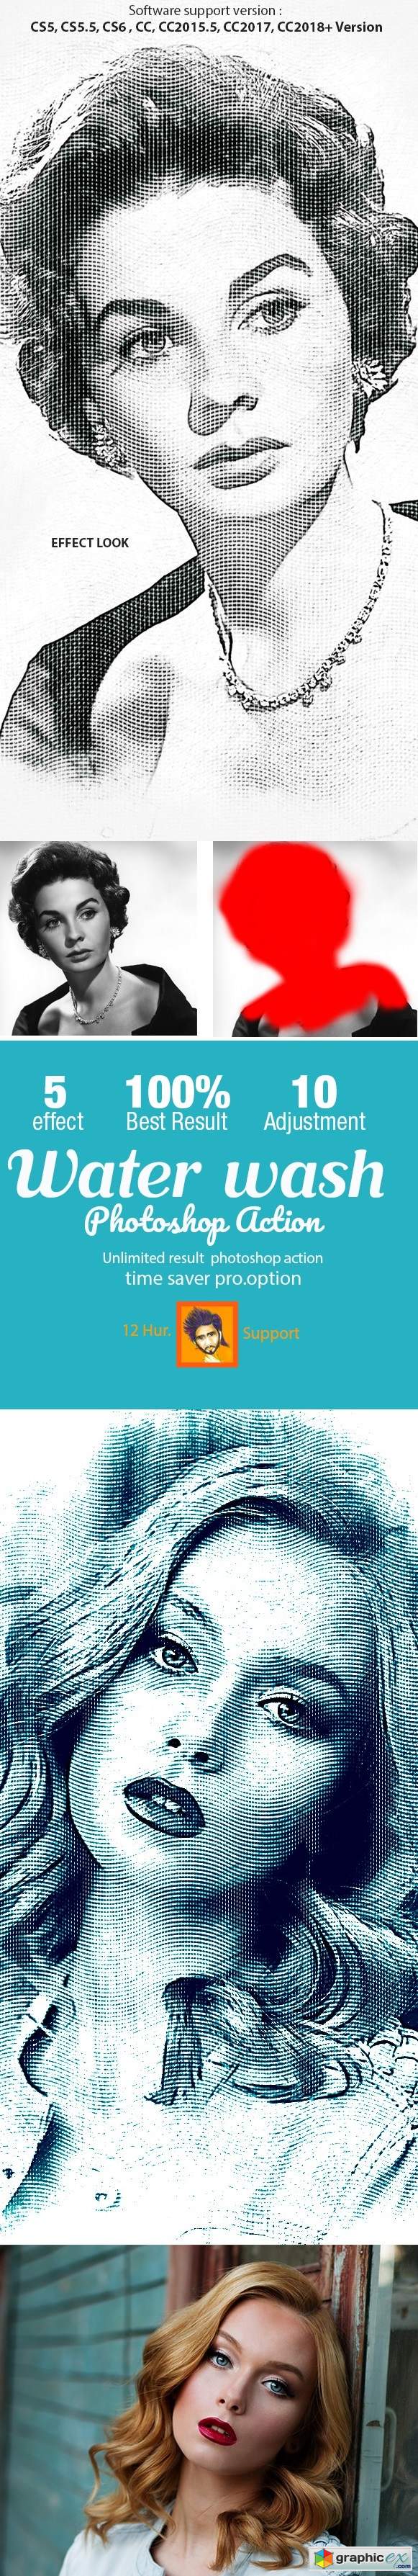 Engraved Effect Photoshop Action